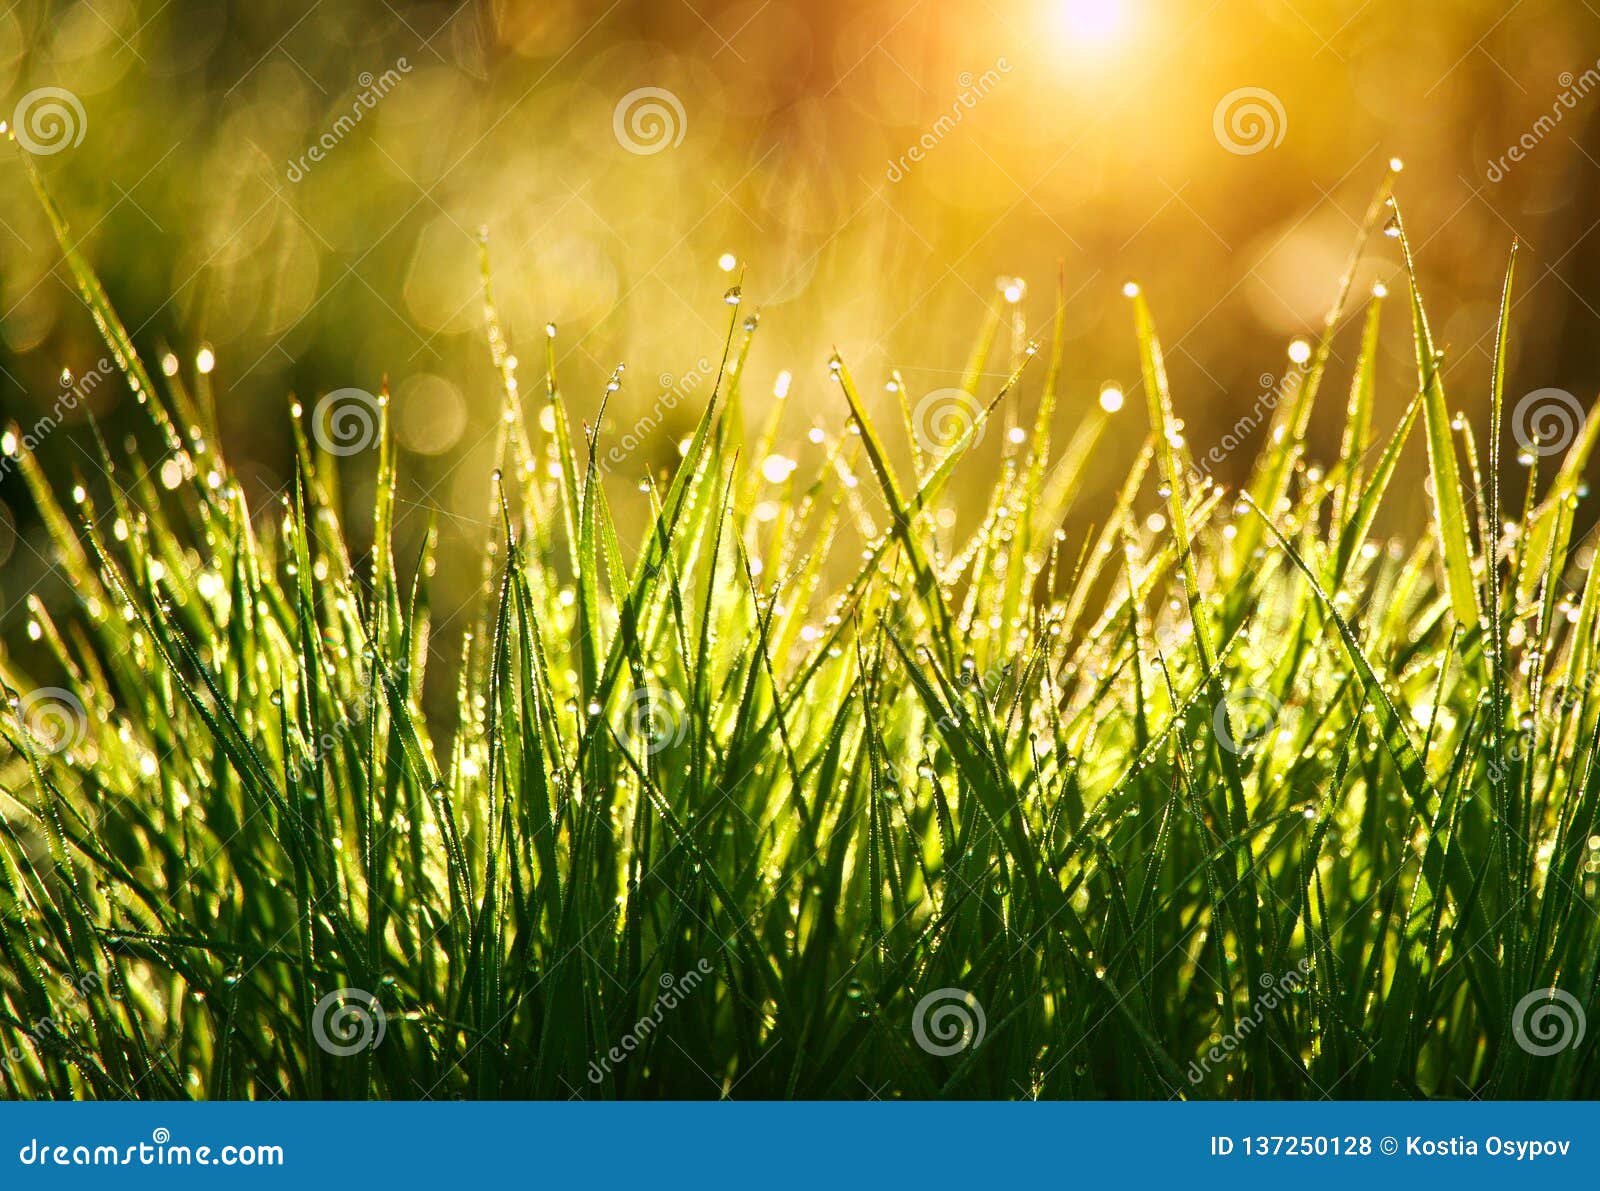 green grass with drops of dew at sunrise in spring in sunlight background beauty of nature awakening vegetation